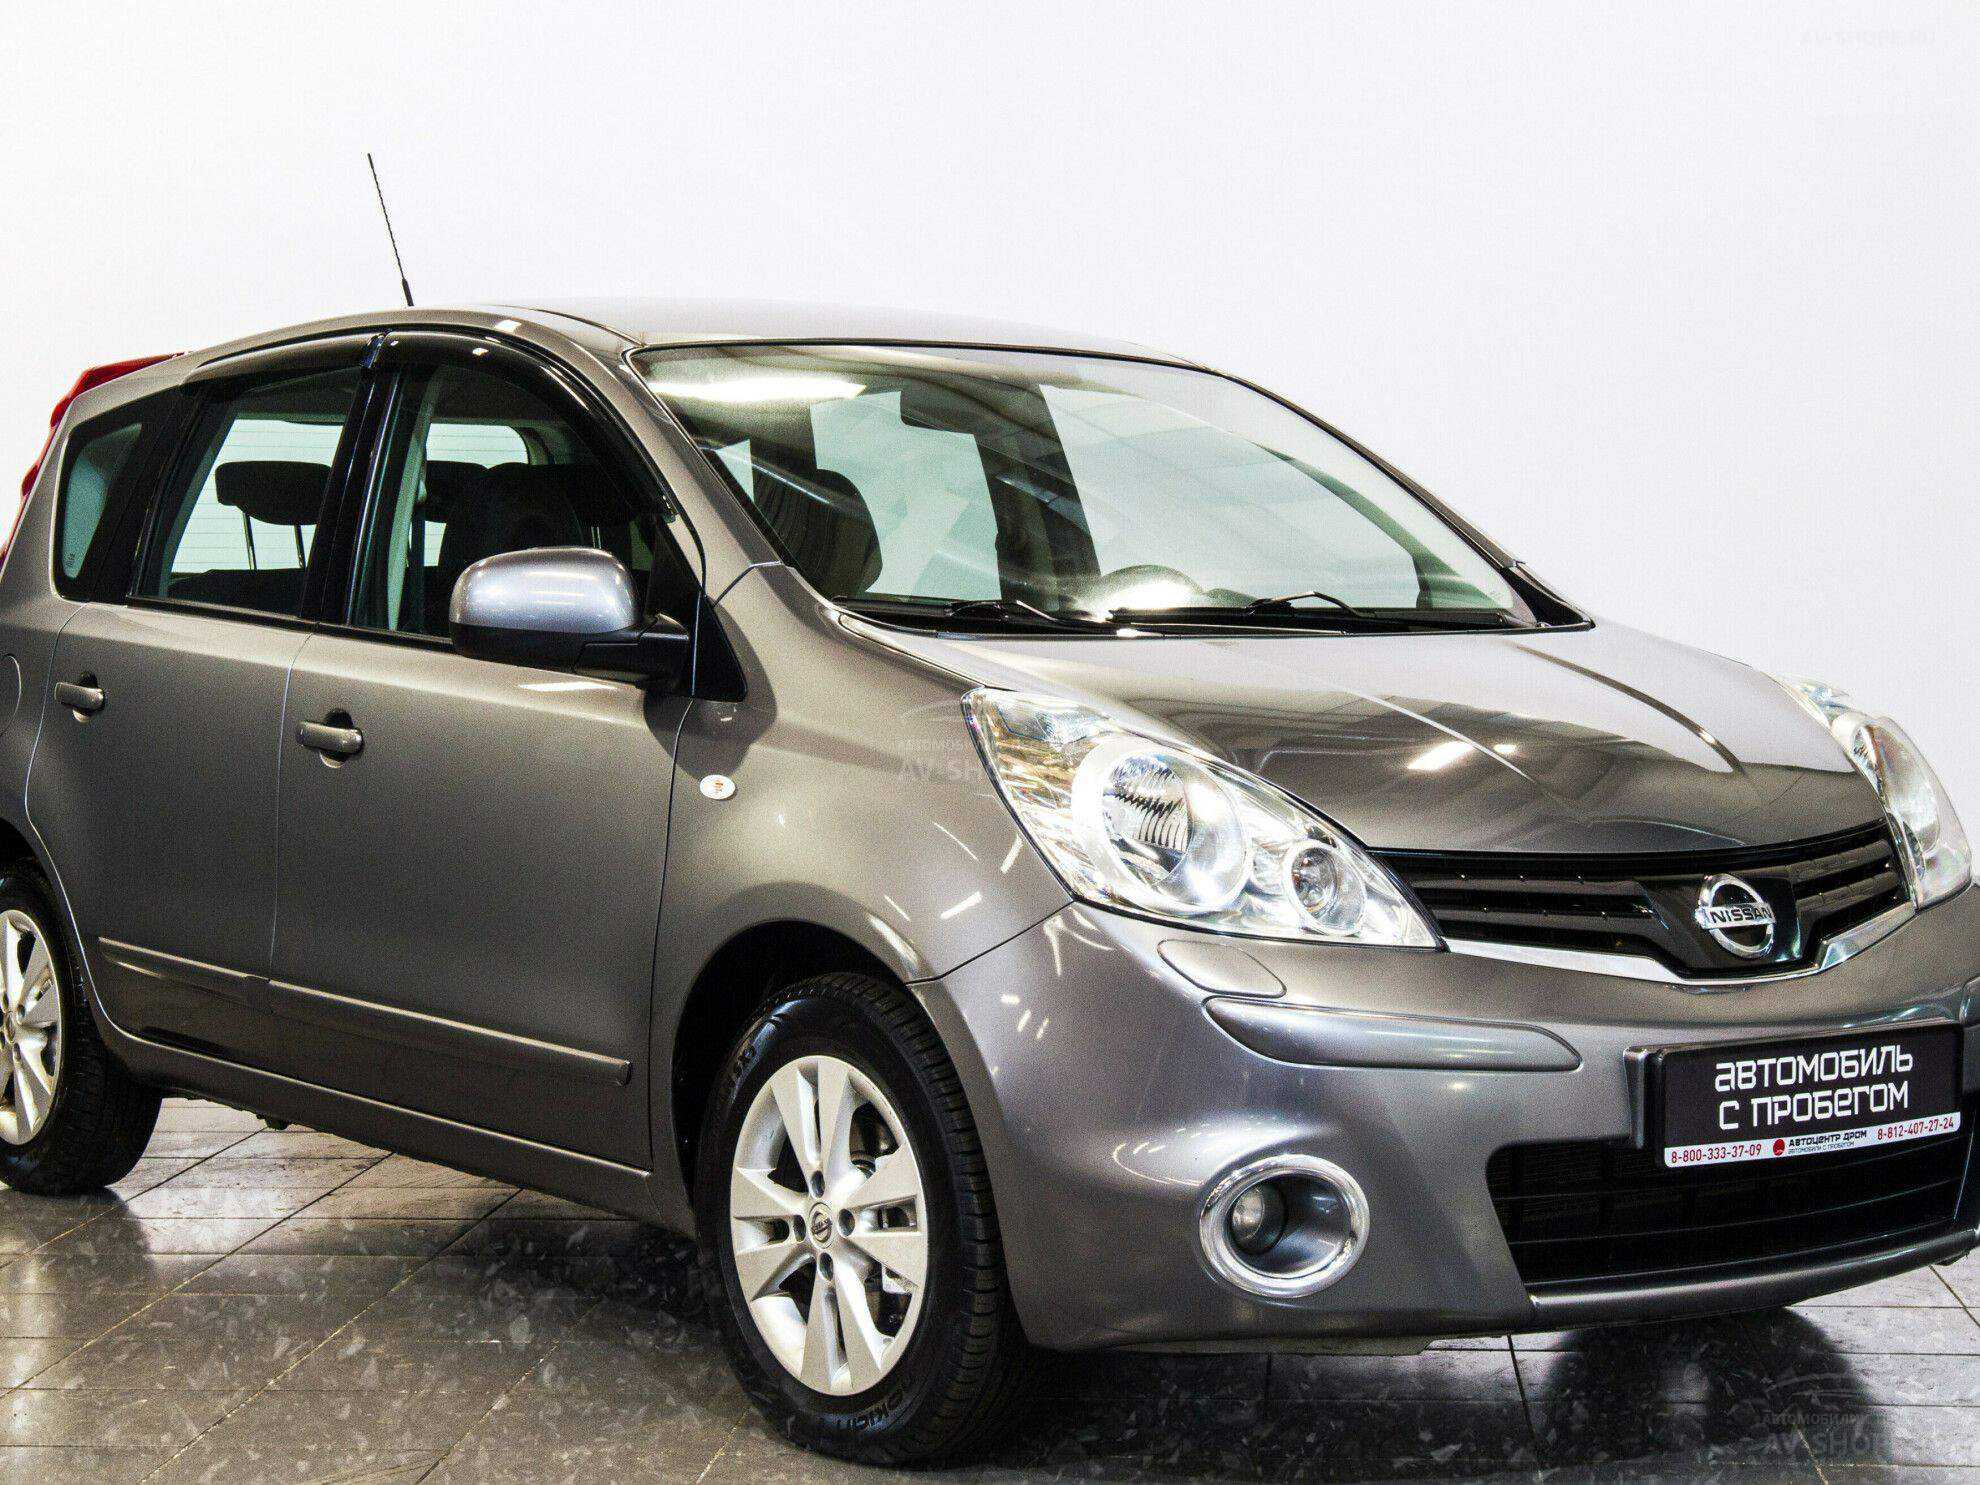 Nissan note автомат. Nissan Note 2013. Ниссан ноут 2013. Nissan Note 2013 автомат. Ниссан ноут 2023.